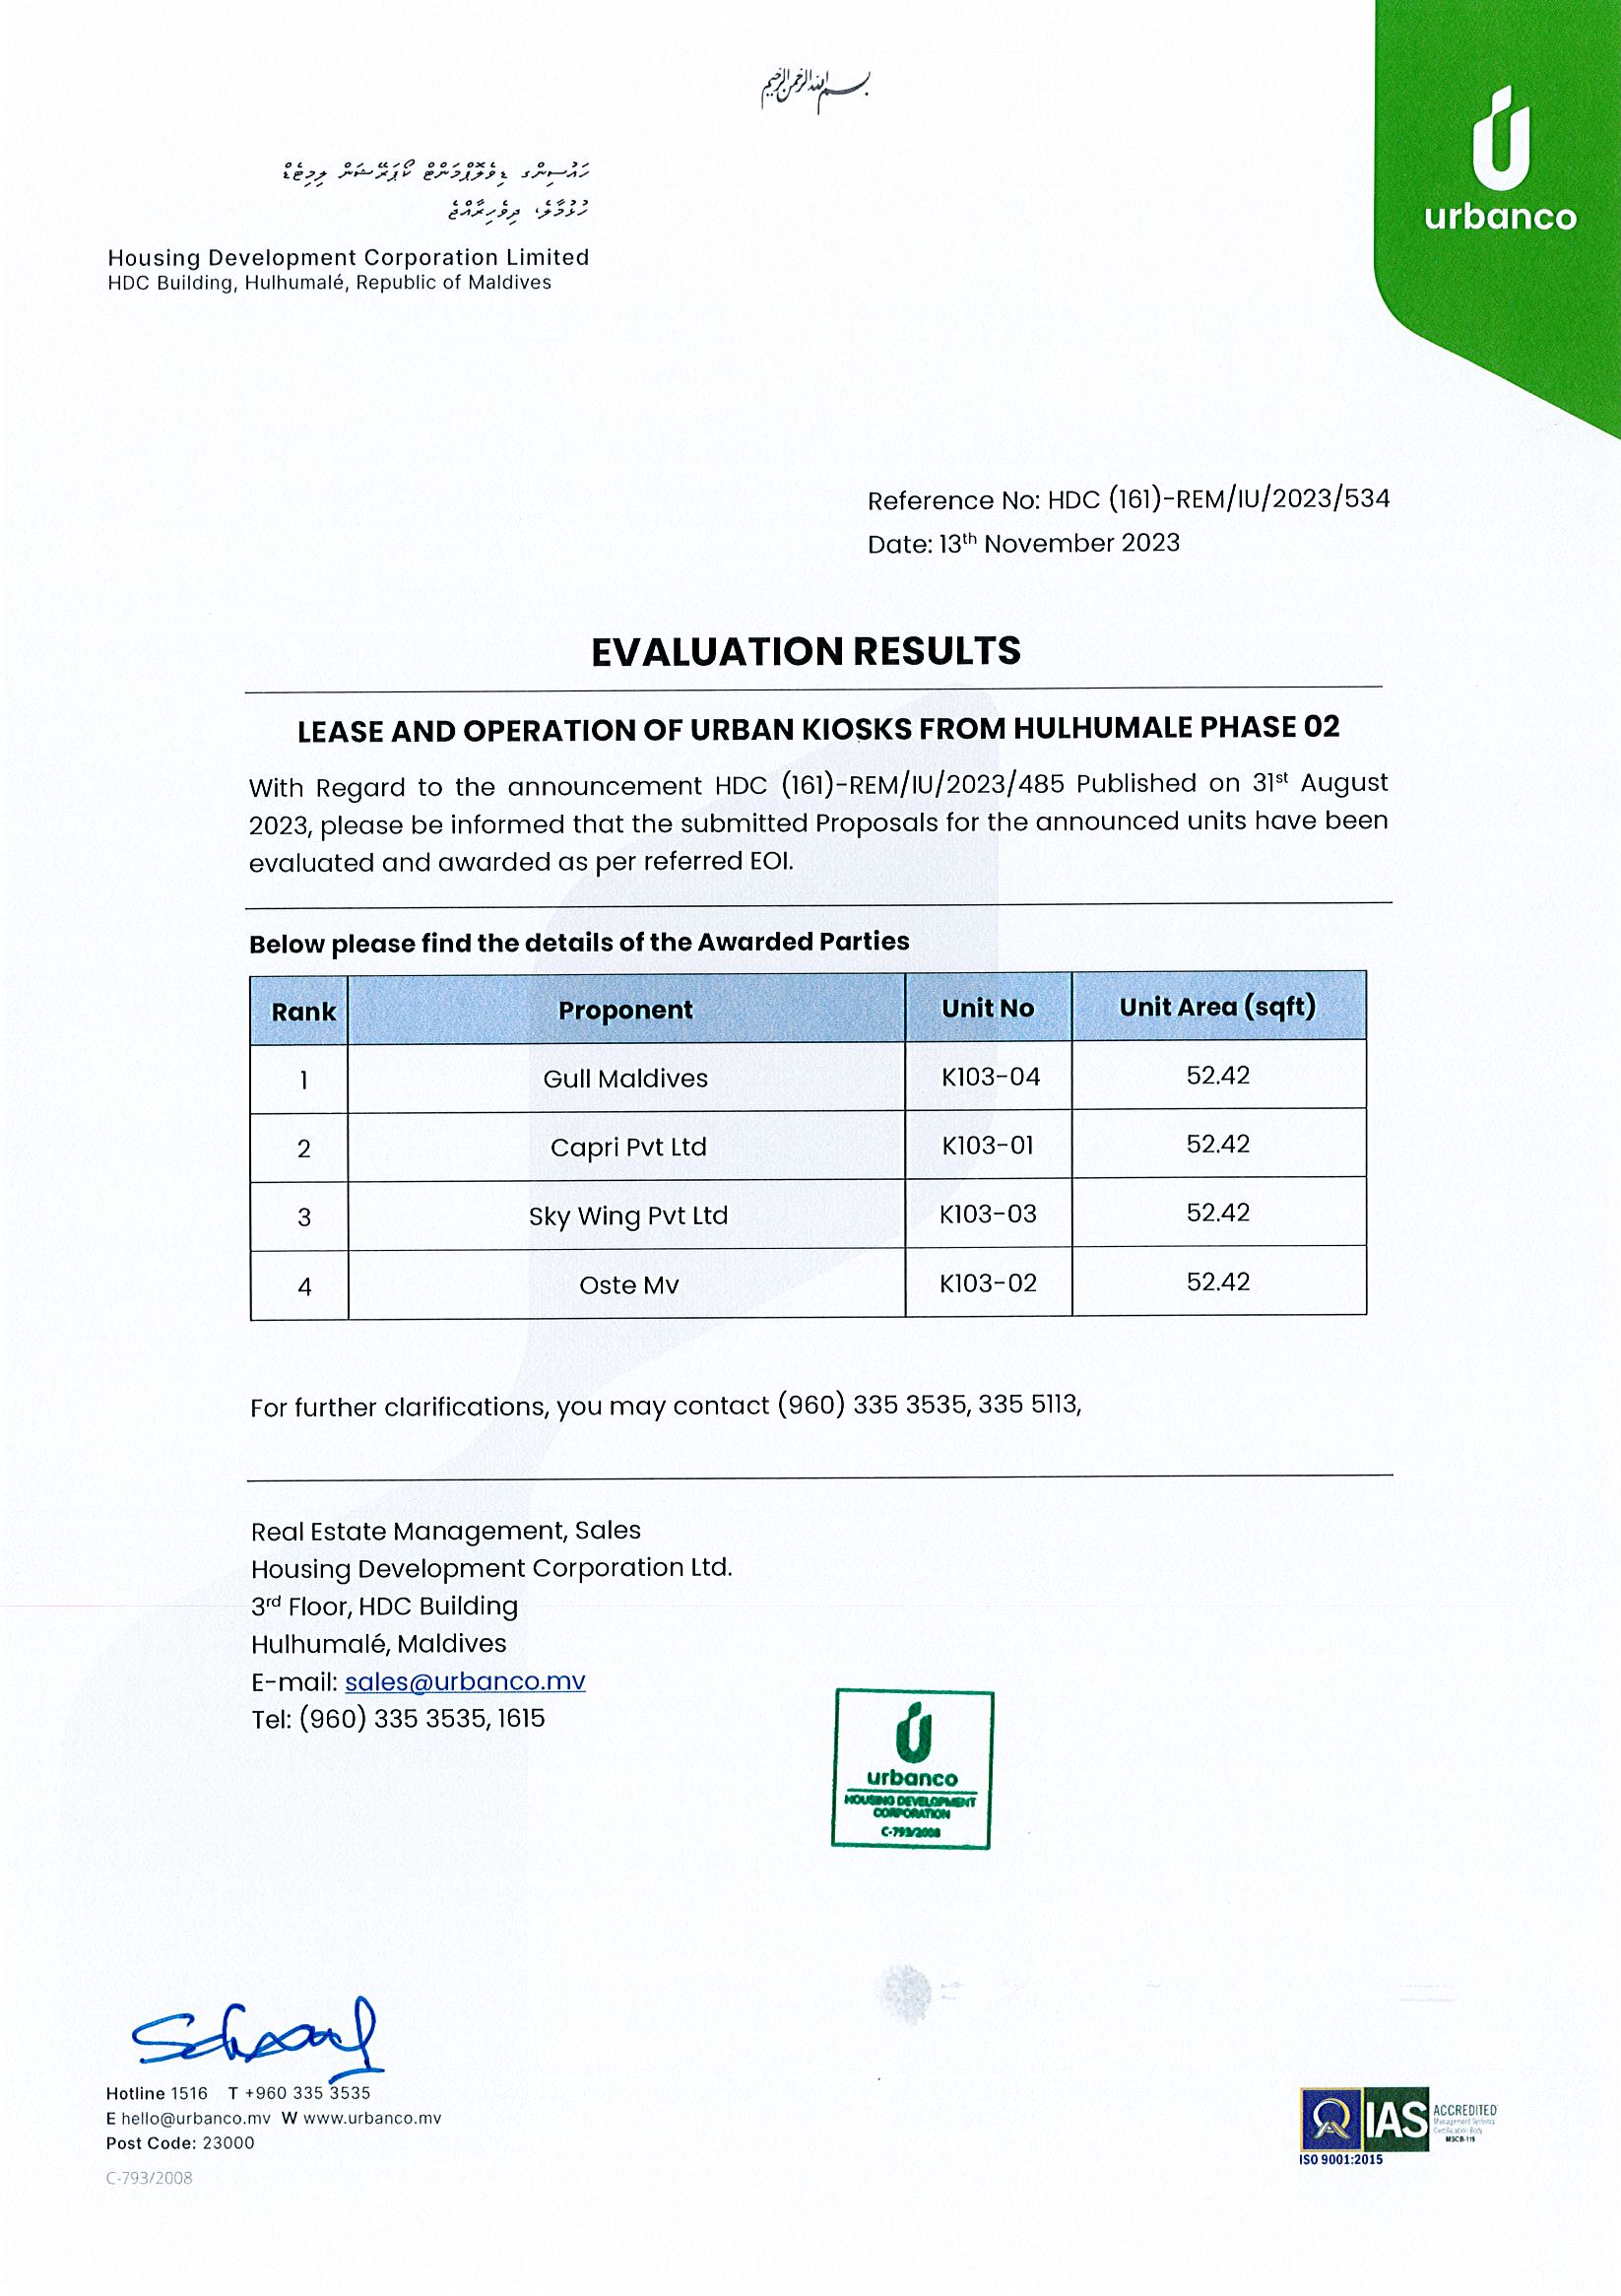 Evaluation Results